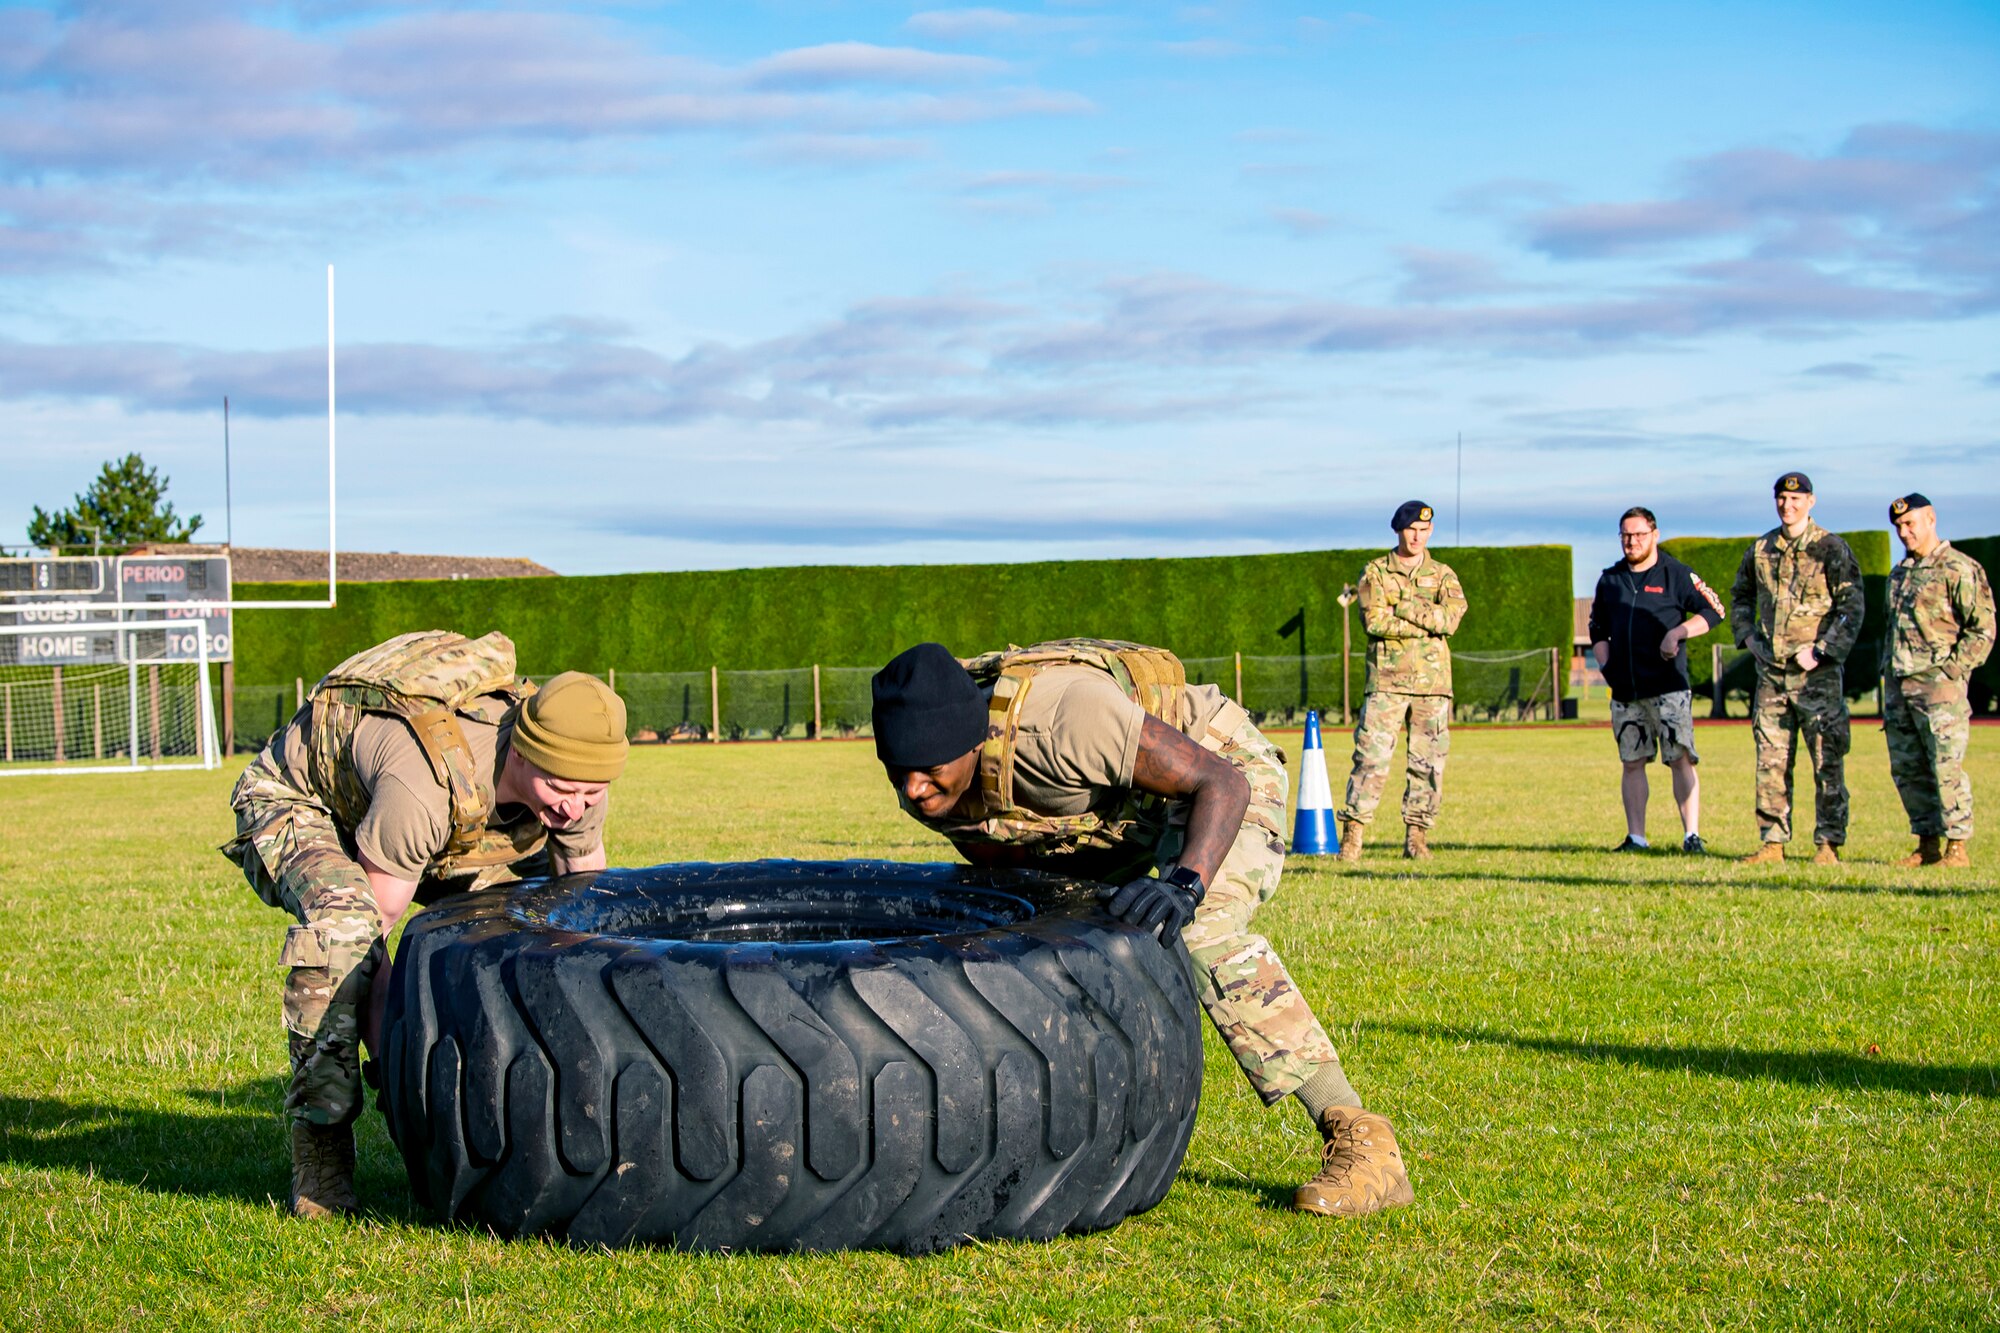 Senior Airman Stone Kraft, left, 423rd Security Forces Squadron installation patrolman, and Staff Sgt. Jaylon Darden, 423rd SFS flight sergeant, flip a tire as part of a defender challenge at RAF Alconbury, England, Oct. 13, 2021. The challenge was part of National Police Week where defenders paid homage to those who have served as police officers and to honor those that lost their lives in the line of duty. (U.S. Air Force photo by Senior Airman Eugene Oliver)